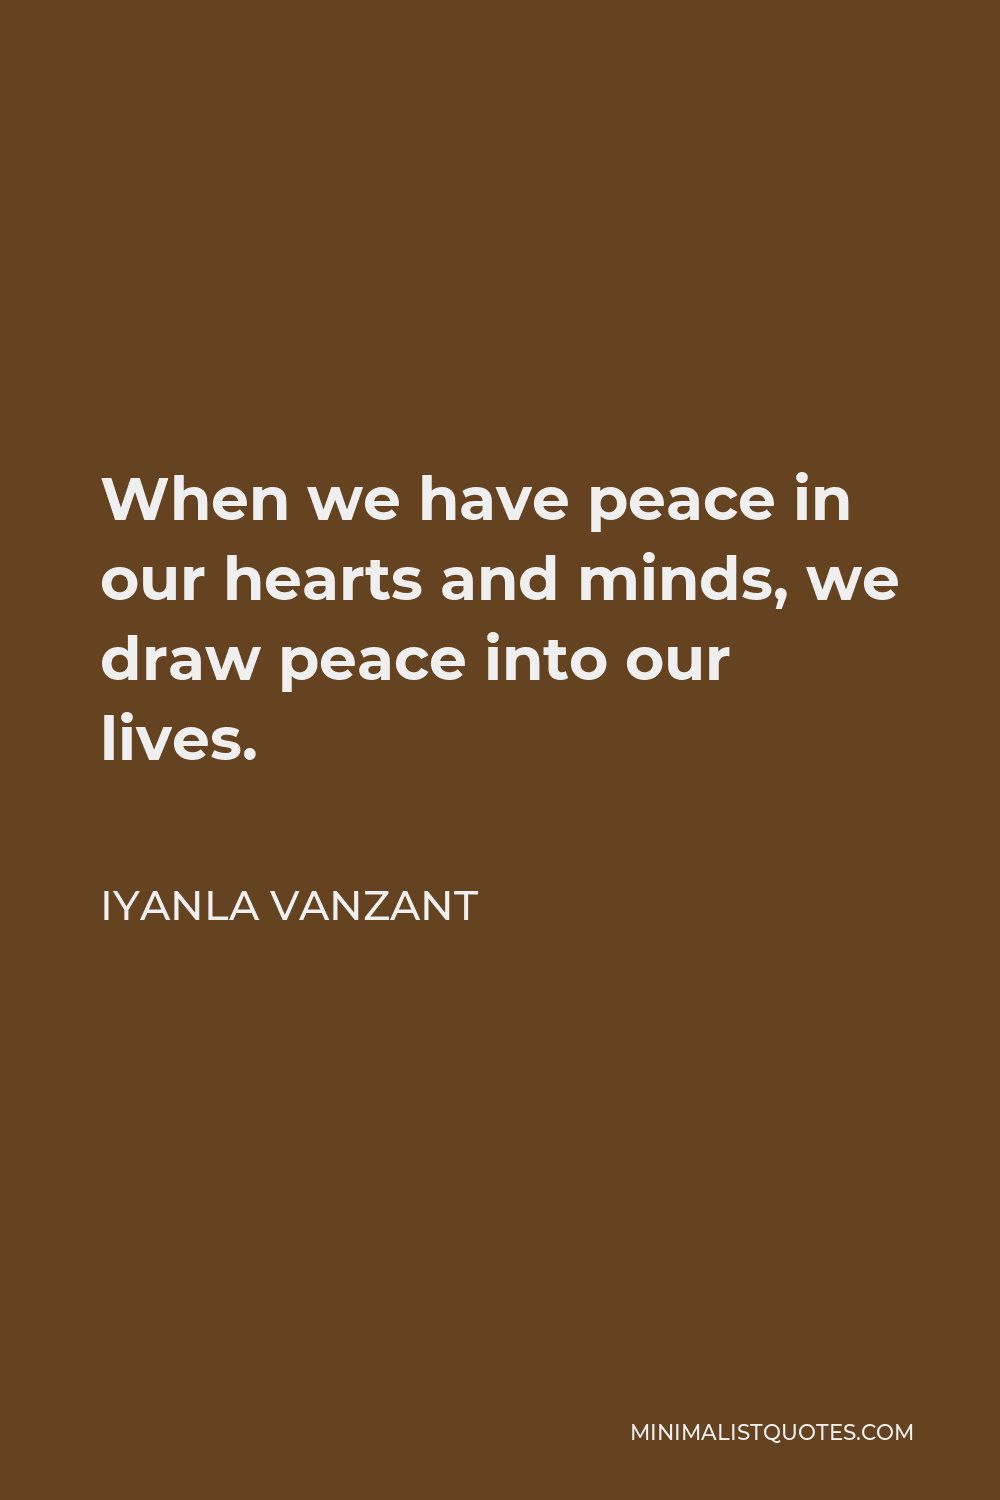 Iyanla Vanzant Quote - When we have peace in our hearts and minds, we draw peace into our lives.